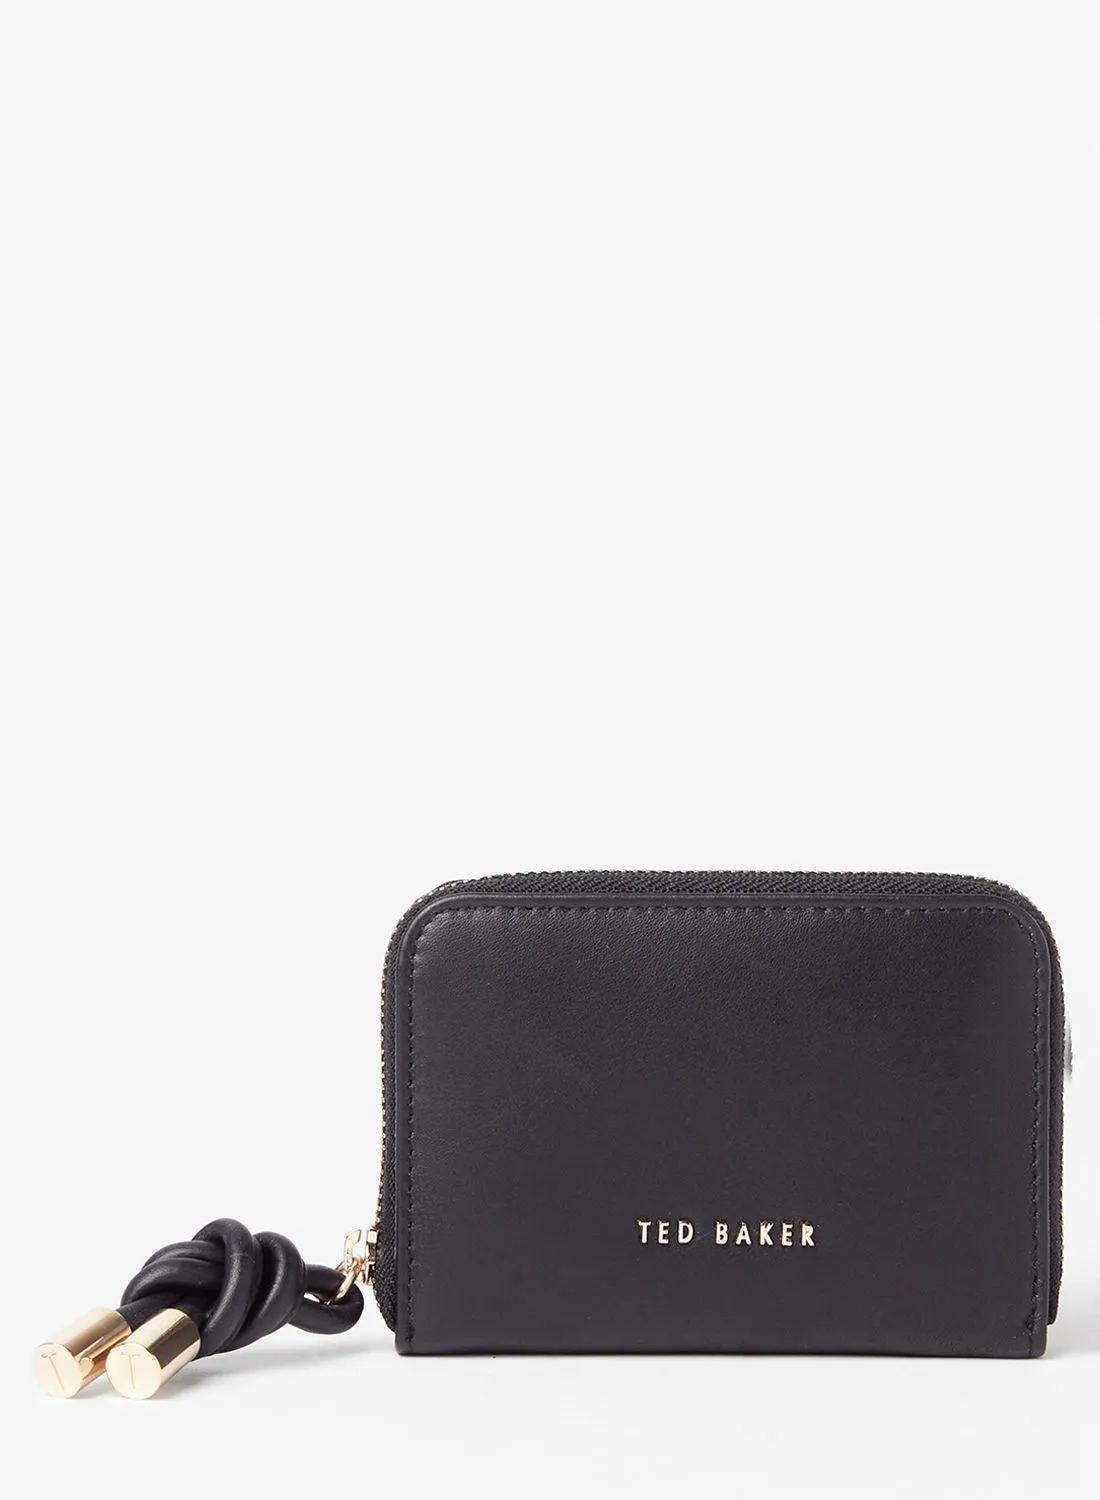 Ted Baker Knotted Zip Around Mini Clutch Black